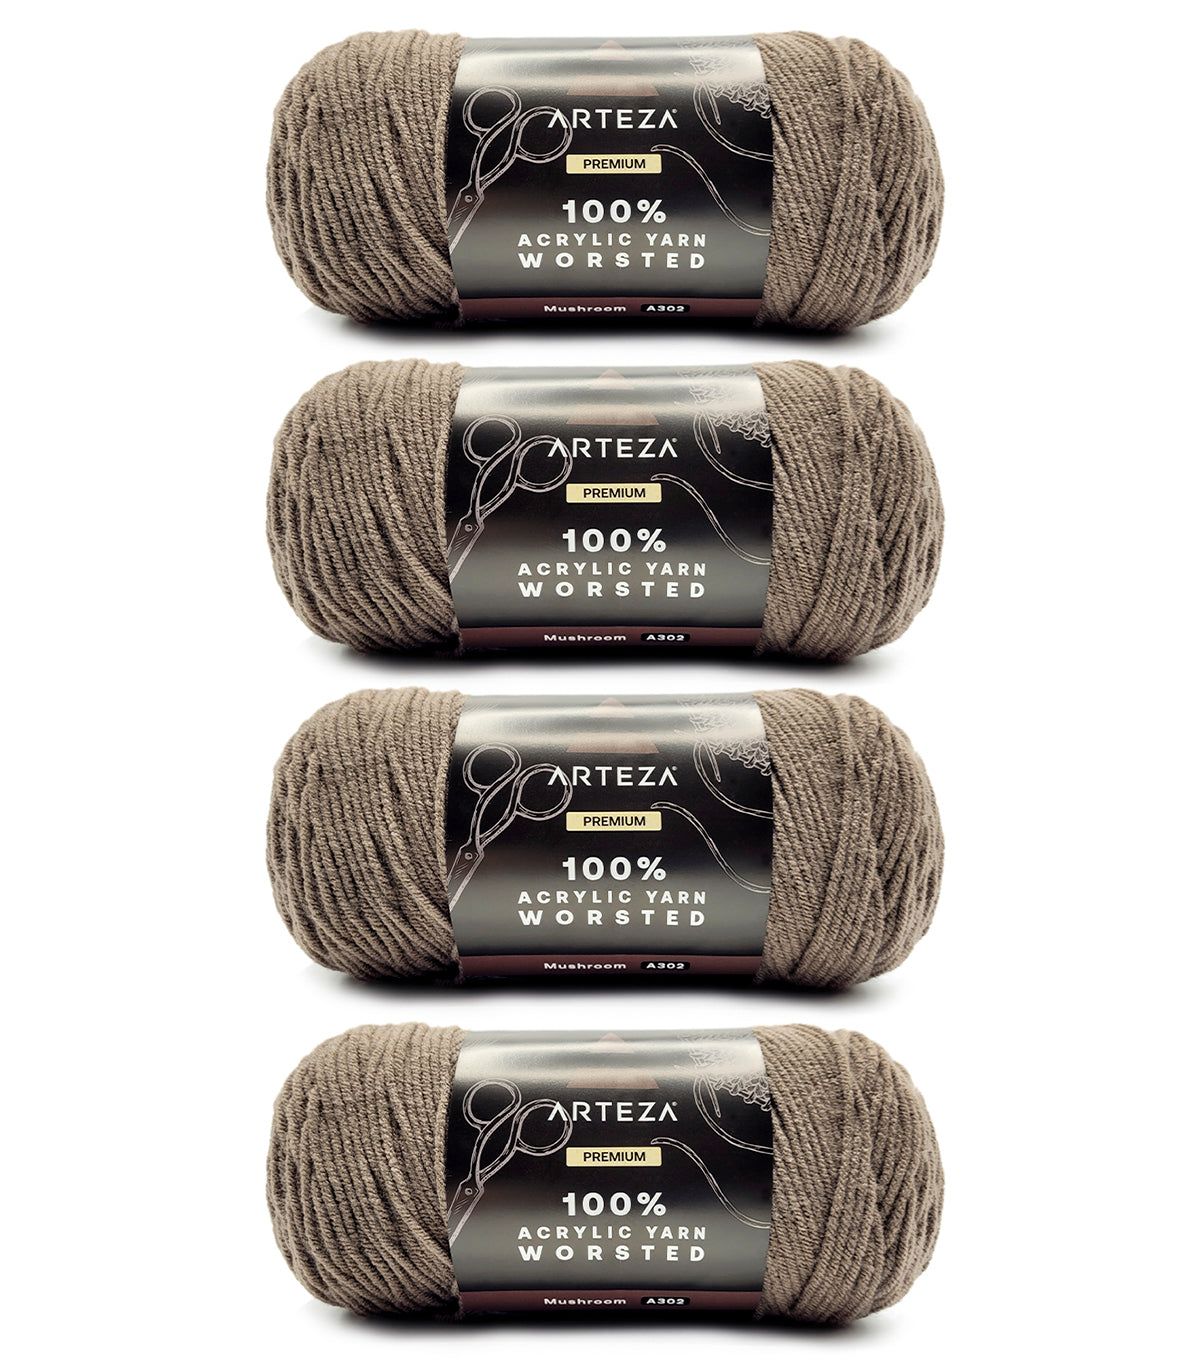 Arteza Acrylic Yarn for Crocheting, 4 x 200-g Skeins of Worsted Yarn for  Knitting, Peacocking A504, Machine Washable, Knitting & Crochet Supplies –